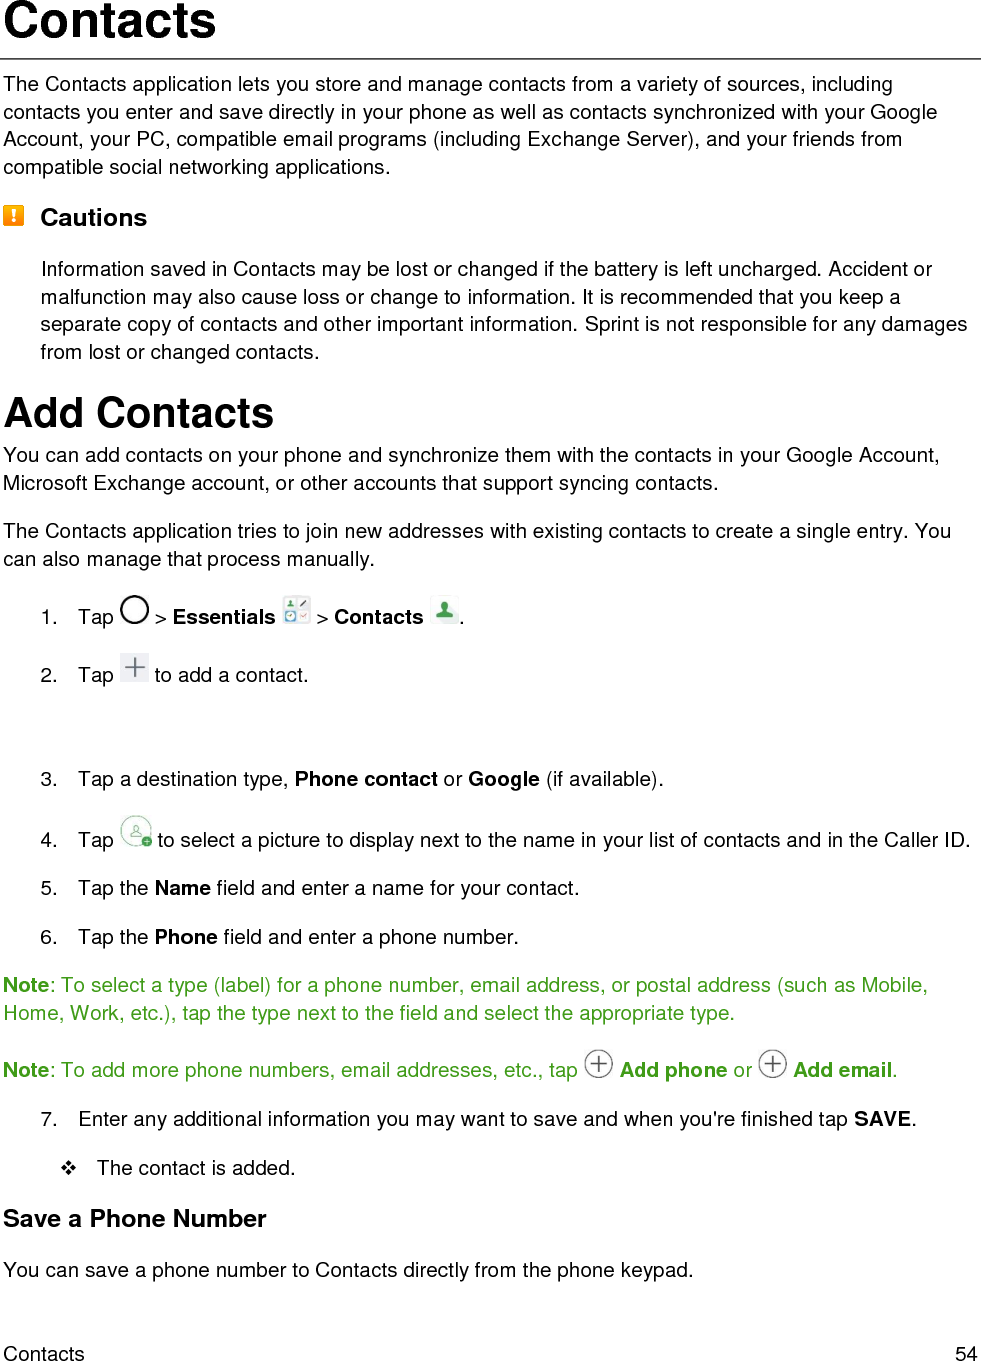  Contacts  54 Contacts The Contacts application lets you store and manage contacts from a variety of sources, including contacts you enter and save directly in your phone as well as contacts synchronized with your Google Account, your PC, compatible email programs (including Exchange Server), and your friends from compatible social networking applications.  Cautions Information saved in Contacts may be lost or changed if the battery is left uncharged. Accident or malfunction may also cause loss or change to information. It is recommended that you keep a separate copy of contacts and other important information. Sprint is not responsible for any damages from lost or changed contacts. Add Contacts You can add contacts on your phone and synchronize them with the contacts in your Google Account, Microsoft Exchange account, or other accounts that support syncing contacts. The Contacts application tries to join new addresses with existing contacts to create a single entry. You can also manage that process manually. 1.  Tap   &gt; Essentials   &gt; Contacts  . 2.  Tap   to add a contact.   3.  Tap a destination type, Phone contact or Google (if available). 4.  Tap   to select a picture to display next to the name in your list of contacts and in the Caller ID. 5.  Tap the Name field and enter a name for your contact.  6.  Tap the Phone field and enter a phone number.  Note: To select a type (label) for a phone number, email address, or postal address (such as Mobile, Home, Work, etc.), tap the type next to the field and select the appropriate type.  Note: To add more phone numbers, email addresses, etc., tap   Add phone or   Add email. 7.  Enter any additional information you may want to save and when you&apos;re finished tap SAVE.   The contact is added. Save a Phone Number You can save a phone number to Contacts directly from the phone keypad. 